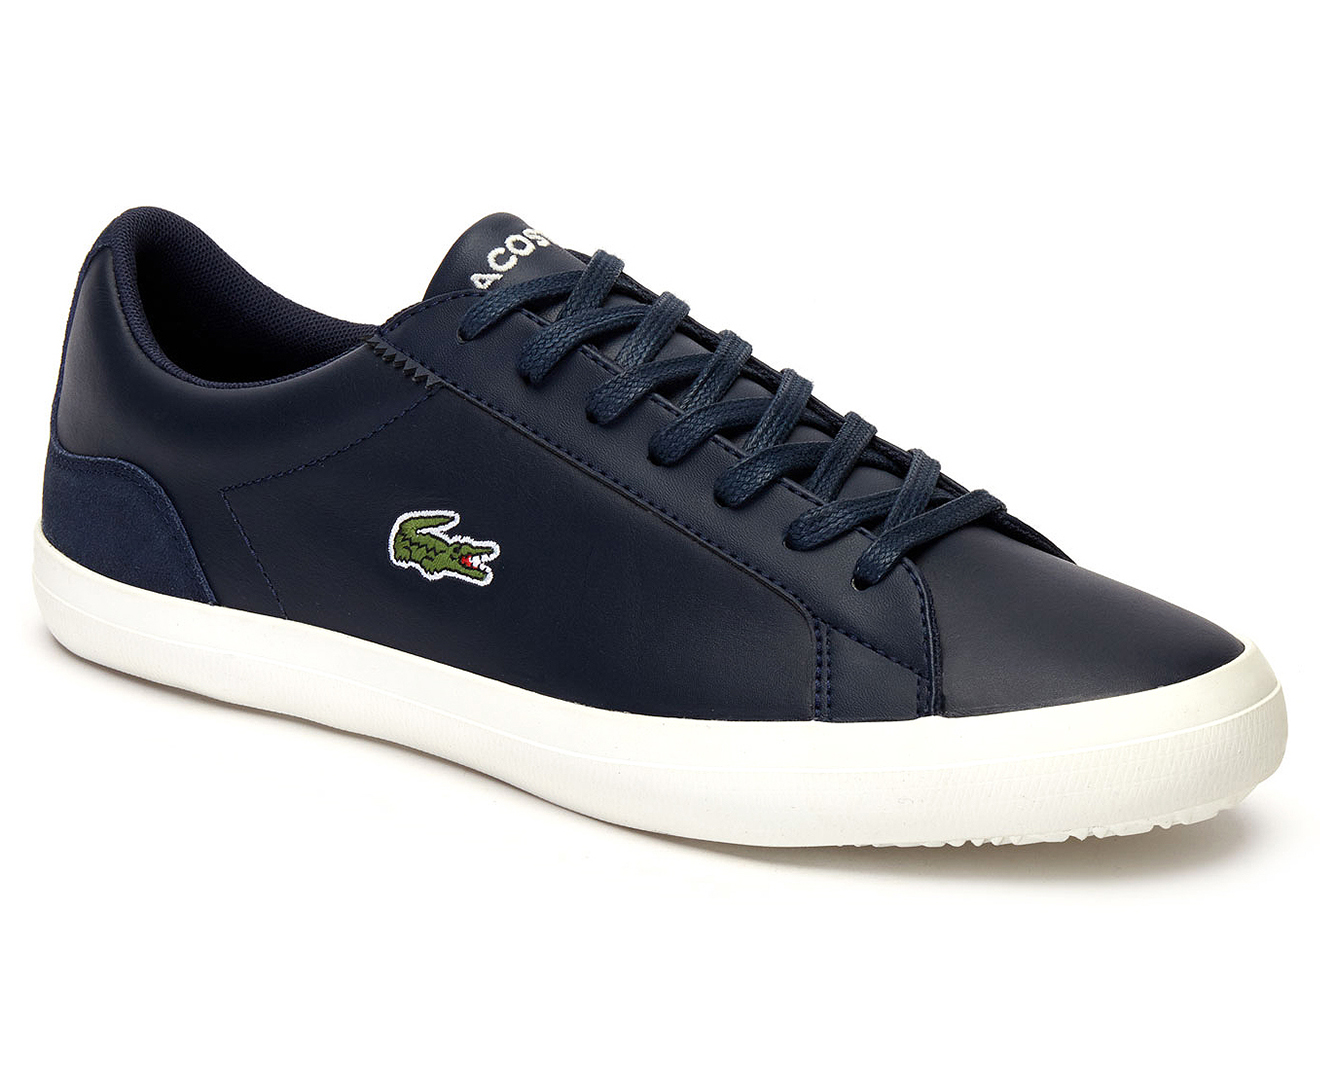 Lacoste Men's Lerond 319 1 Sneakers - Navy/Off White | Catch.co.nz